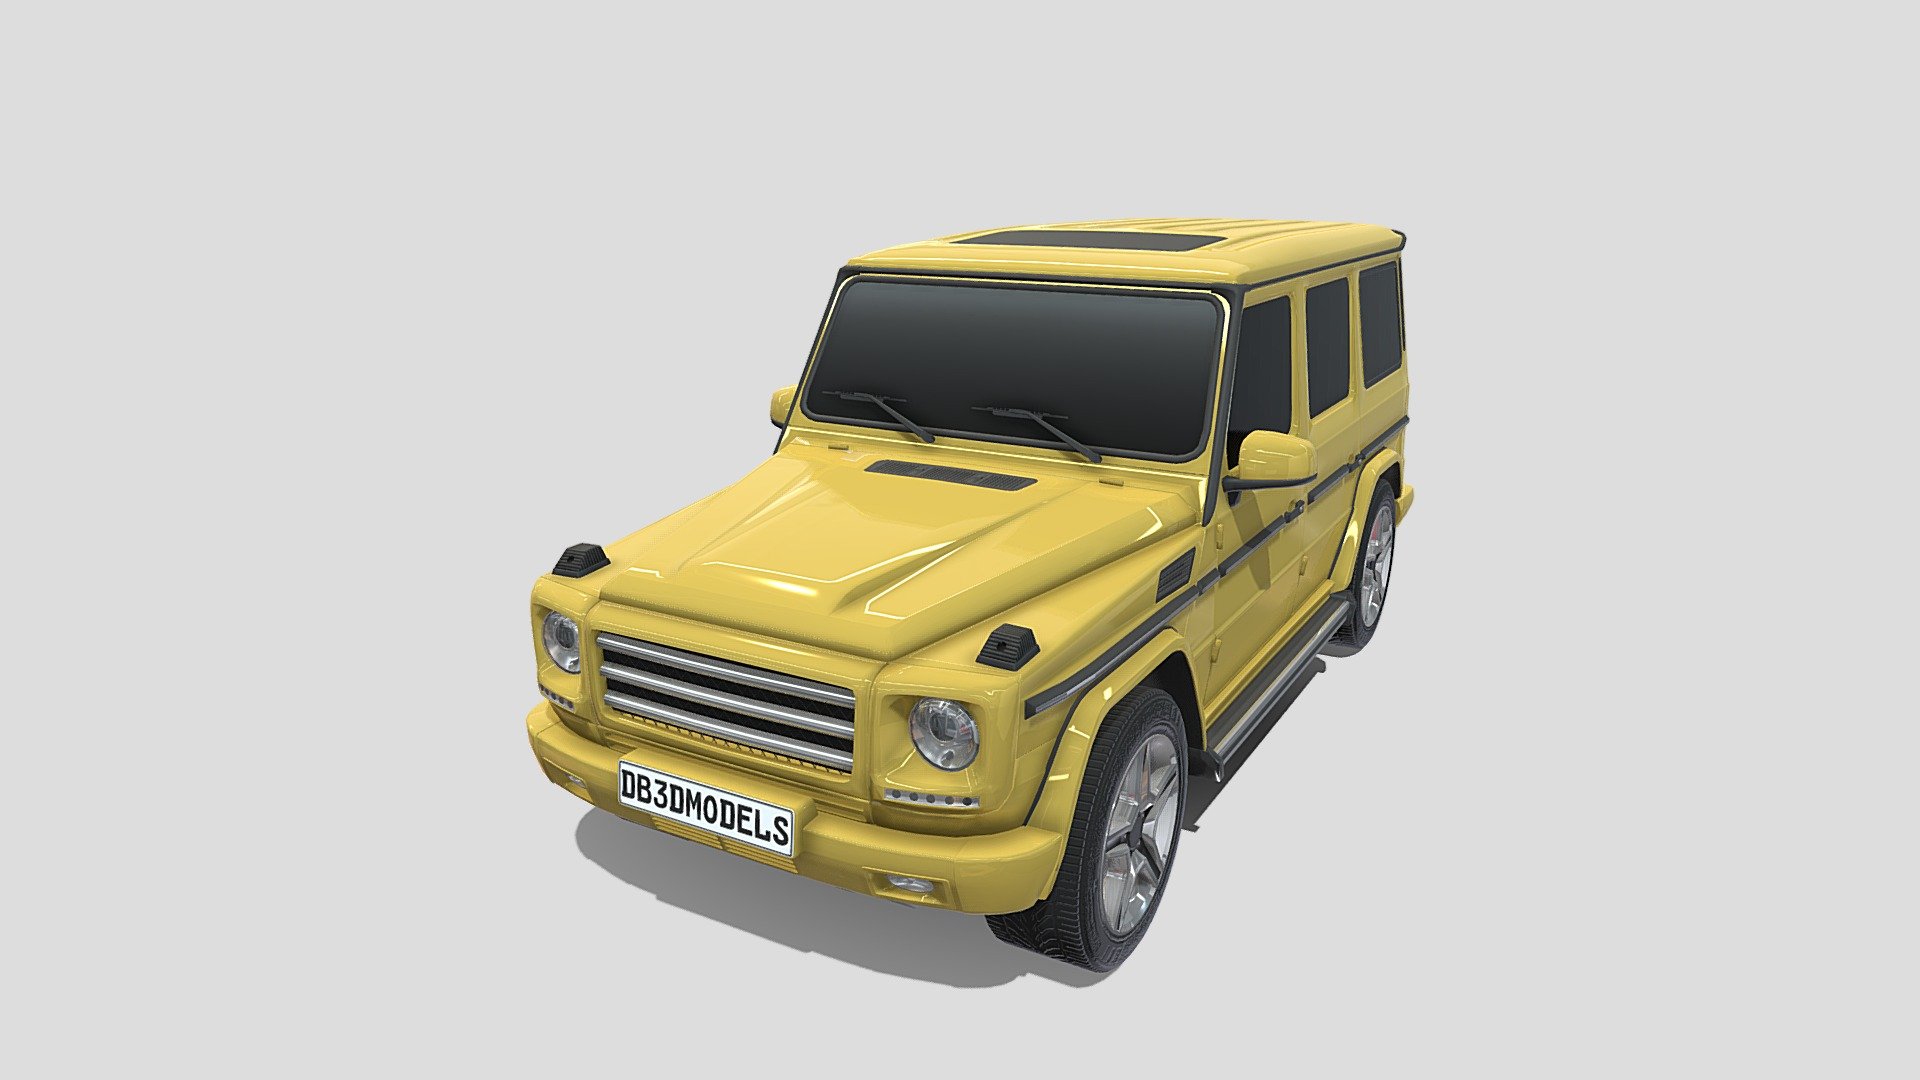 Highly detailed Generic SUV 3d model rendered with Cycles in Blender, as per seen on attached images. 
The 3d model is scaled to original size in Blender.

File formats:
-.blend, rendered with cycles, as seen in the images;
-.obj, with materials applied;
-.dae, with materials applied;
-.fbx, with materials applied;
-.stl;

Files come named appropriately and split by file format.

3D Software:
The 3D model was originally created in Blender 2.8 and rendered with Cycles.

Materials and textures:
The models have materials applied in all formats, and are ready to import and render.
The models come with three png textures(one for the number plate, which can easily be removed).

Preview scenes:
The preview images are rendered in Blender using its built-in render engine &lsquo;Cycles'.

For any problems please feel free to contact me.

Don't forget to rate and enjoy! - Generic Luxury SUV - Buy Royalty Free 3D model by dragosburian 3d model